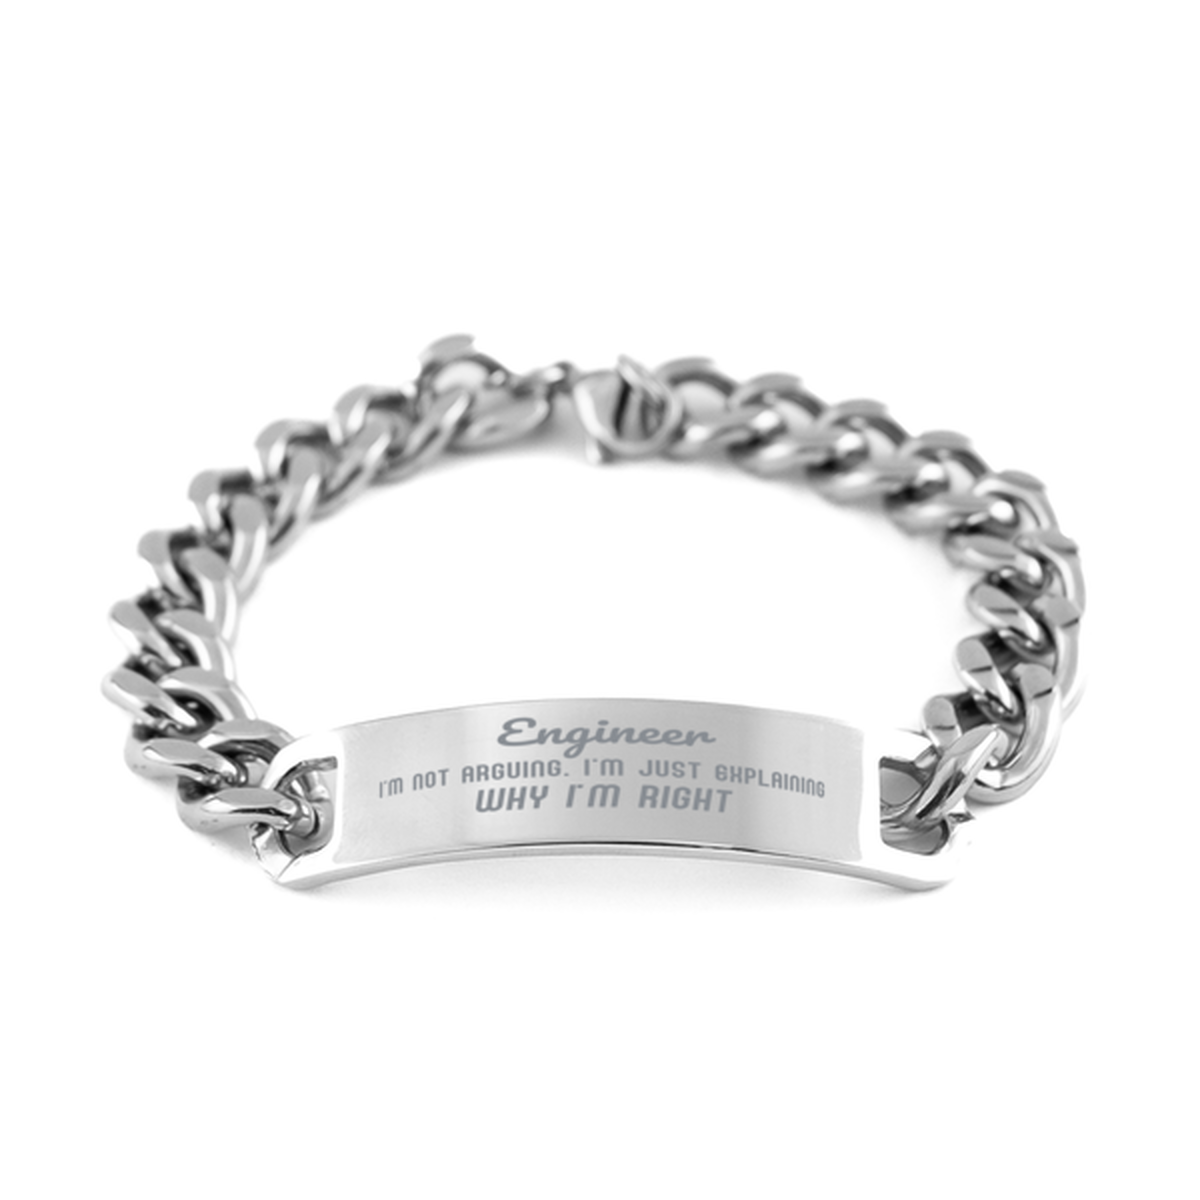 Engineer I'm not Arguing. I'm Just Explaining Why I'm RIGHT Cuban Chain Stainless Steel Bracelet, Graduation Birthday Christmas Engineer Gifts For Engineer Funny Saying Quote Present for Men Women Coworker